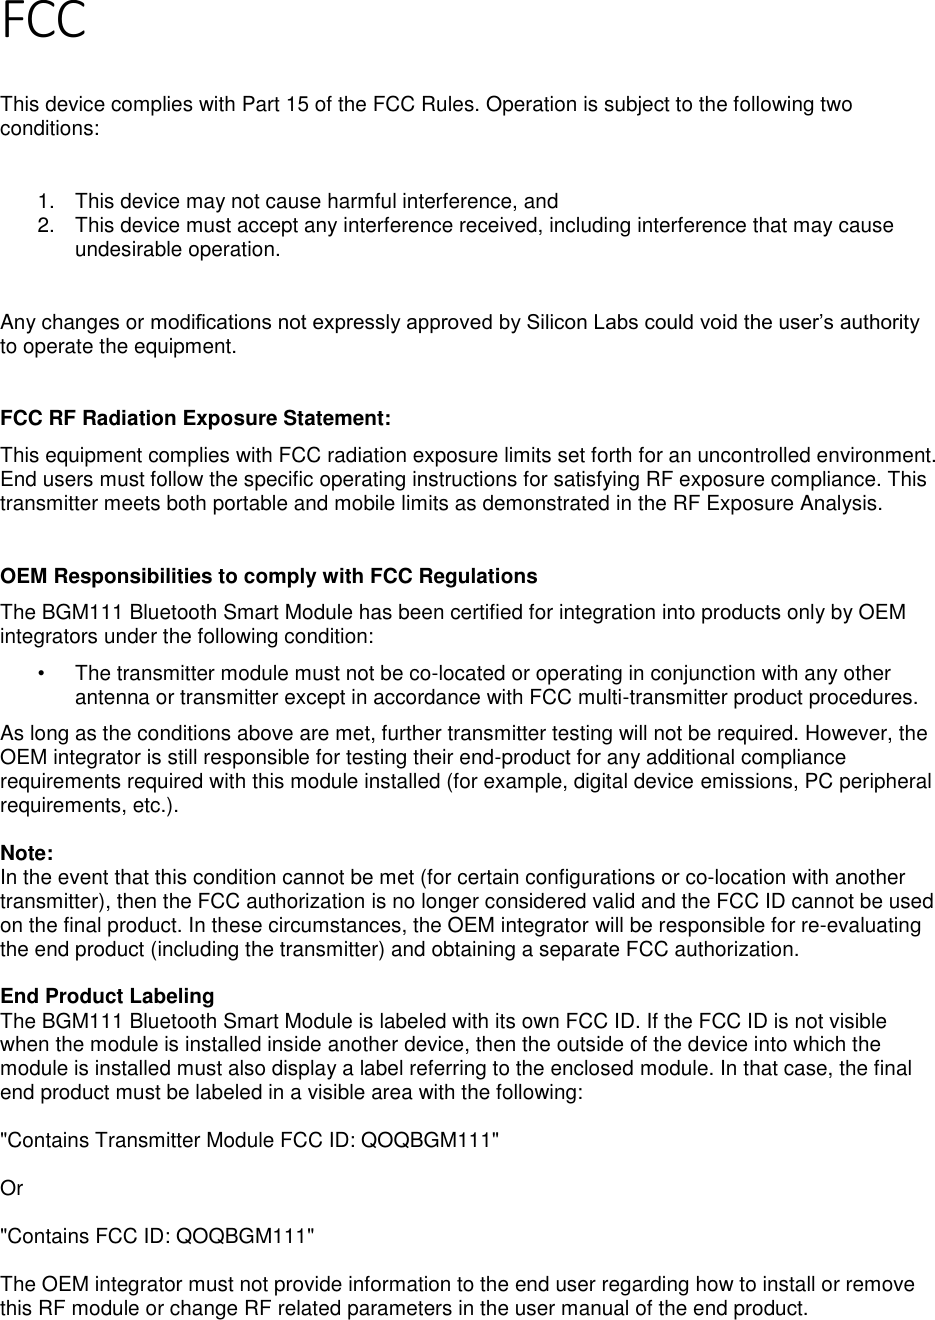 Page 4 of 7 FCC  This device complies with Part 15 of the FCC Rules. Operation is subject to the following two conditions:  1.  This device may not cause harmful interference, and 2.  This device must accept any interference received, including interference that may cause undesirable operation.  Any changes or modifications not expressly approved by Silicon Labs could void the user’s authority to operate the equipment.  FCC RF Radiation Exposure Statement: This equipment complies with FCC radiation exposure limits set forth for an uncontrolled environment. End users must follow the specific operating instructions for satisfying RF exposure compliance. This transmitter meets both portable and mobile limits as demonstrated in the RF Exposure Analysis.   OEM Responsibilities to comply with FCC Regulations The BGM111 Bluetooth Smart Module has been certified for integration into products only by OEM integrators under the following condition: •  The transmitter module must not be co-located or operating in conjunction with any other antenna or transmitter except in accordance with FCC multi-transmitter product procedures. As long as the conditions above are met, further transmitter testing will not be required. However, the OEM integrator is still responsible for testing their end-product for any additional compliance requirements required with this module installed (for example, digital device emissions, PC peripheral requirements, etc.).  Note: In the event that this condition cannot be met (for certain configurations or co-location with another transmitter), then the FCC authorization is no longer considered valid and the FCC ID cannot be used on the final product. In these circumstances, the OEM integrator will be responsible for re-evaluating the end product (including the transmitter) and obtaining a separate FCC authorization.  End Product Labeling The BGM111 Bluetooth Smart Module is labeled with its own FCC ID. If the FCC ID is not visible when the module is installed inside another device, then the outside of the device into which the module is installed must also display a label referring to the enclosed module. In that case, the final end product must be labeled in a visible area with the following:  &quot;Contains Transmitter Module FCC ID: QOQBGM111&quot;  Or  &quot;Contains FCC ID: QOQBGM111&quot;  The OEM integrator must not provide information to the end user regarding how to install or remove this RF module or change RF related parameters in the user manual of the end product.   